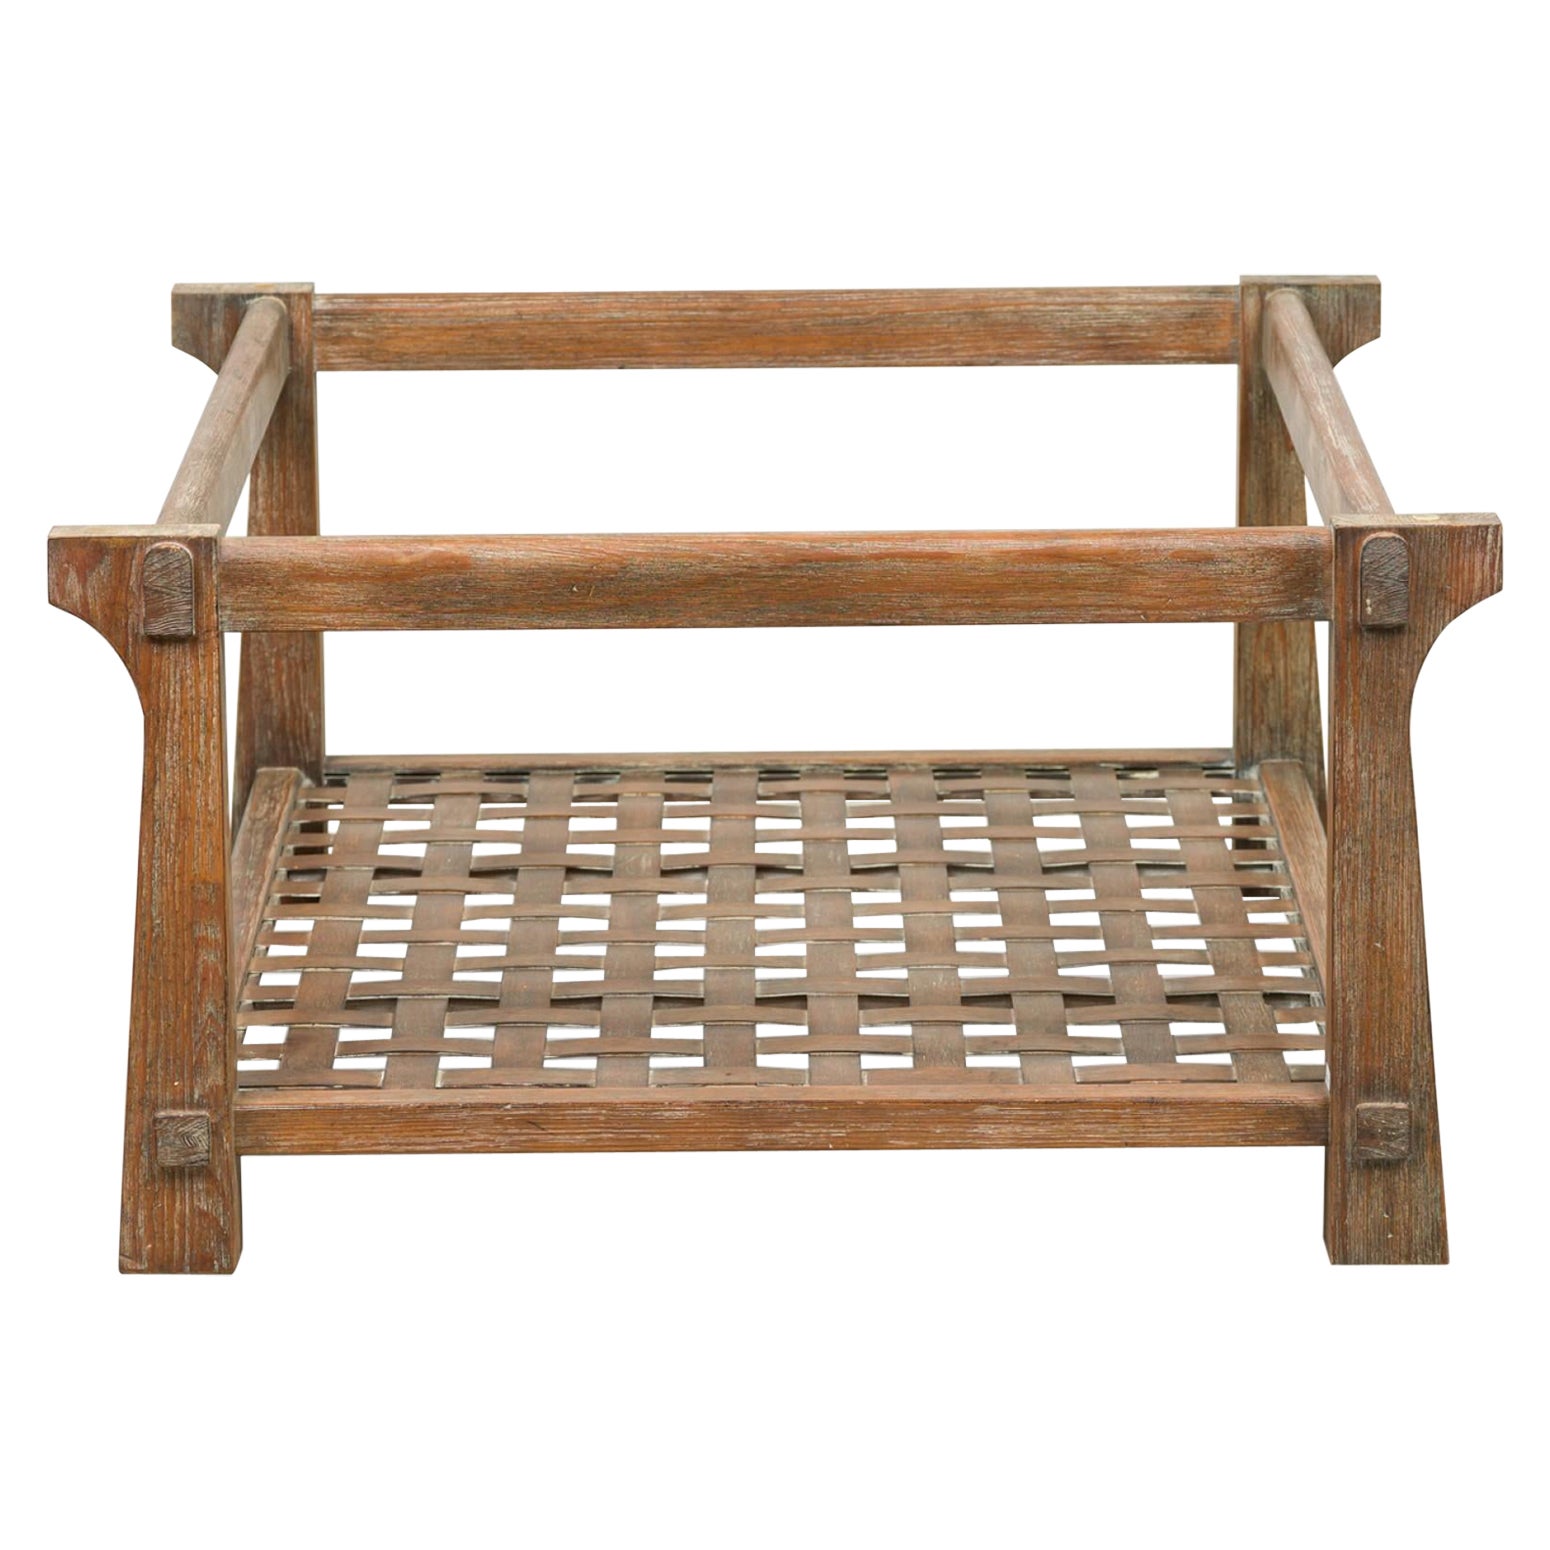 Jamie Herzlinger American Cerused Wood and Caned Low Coffee Table Frame For Sale